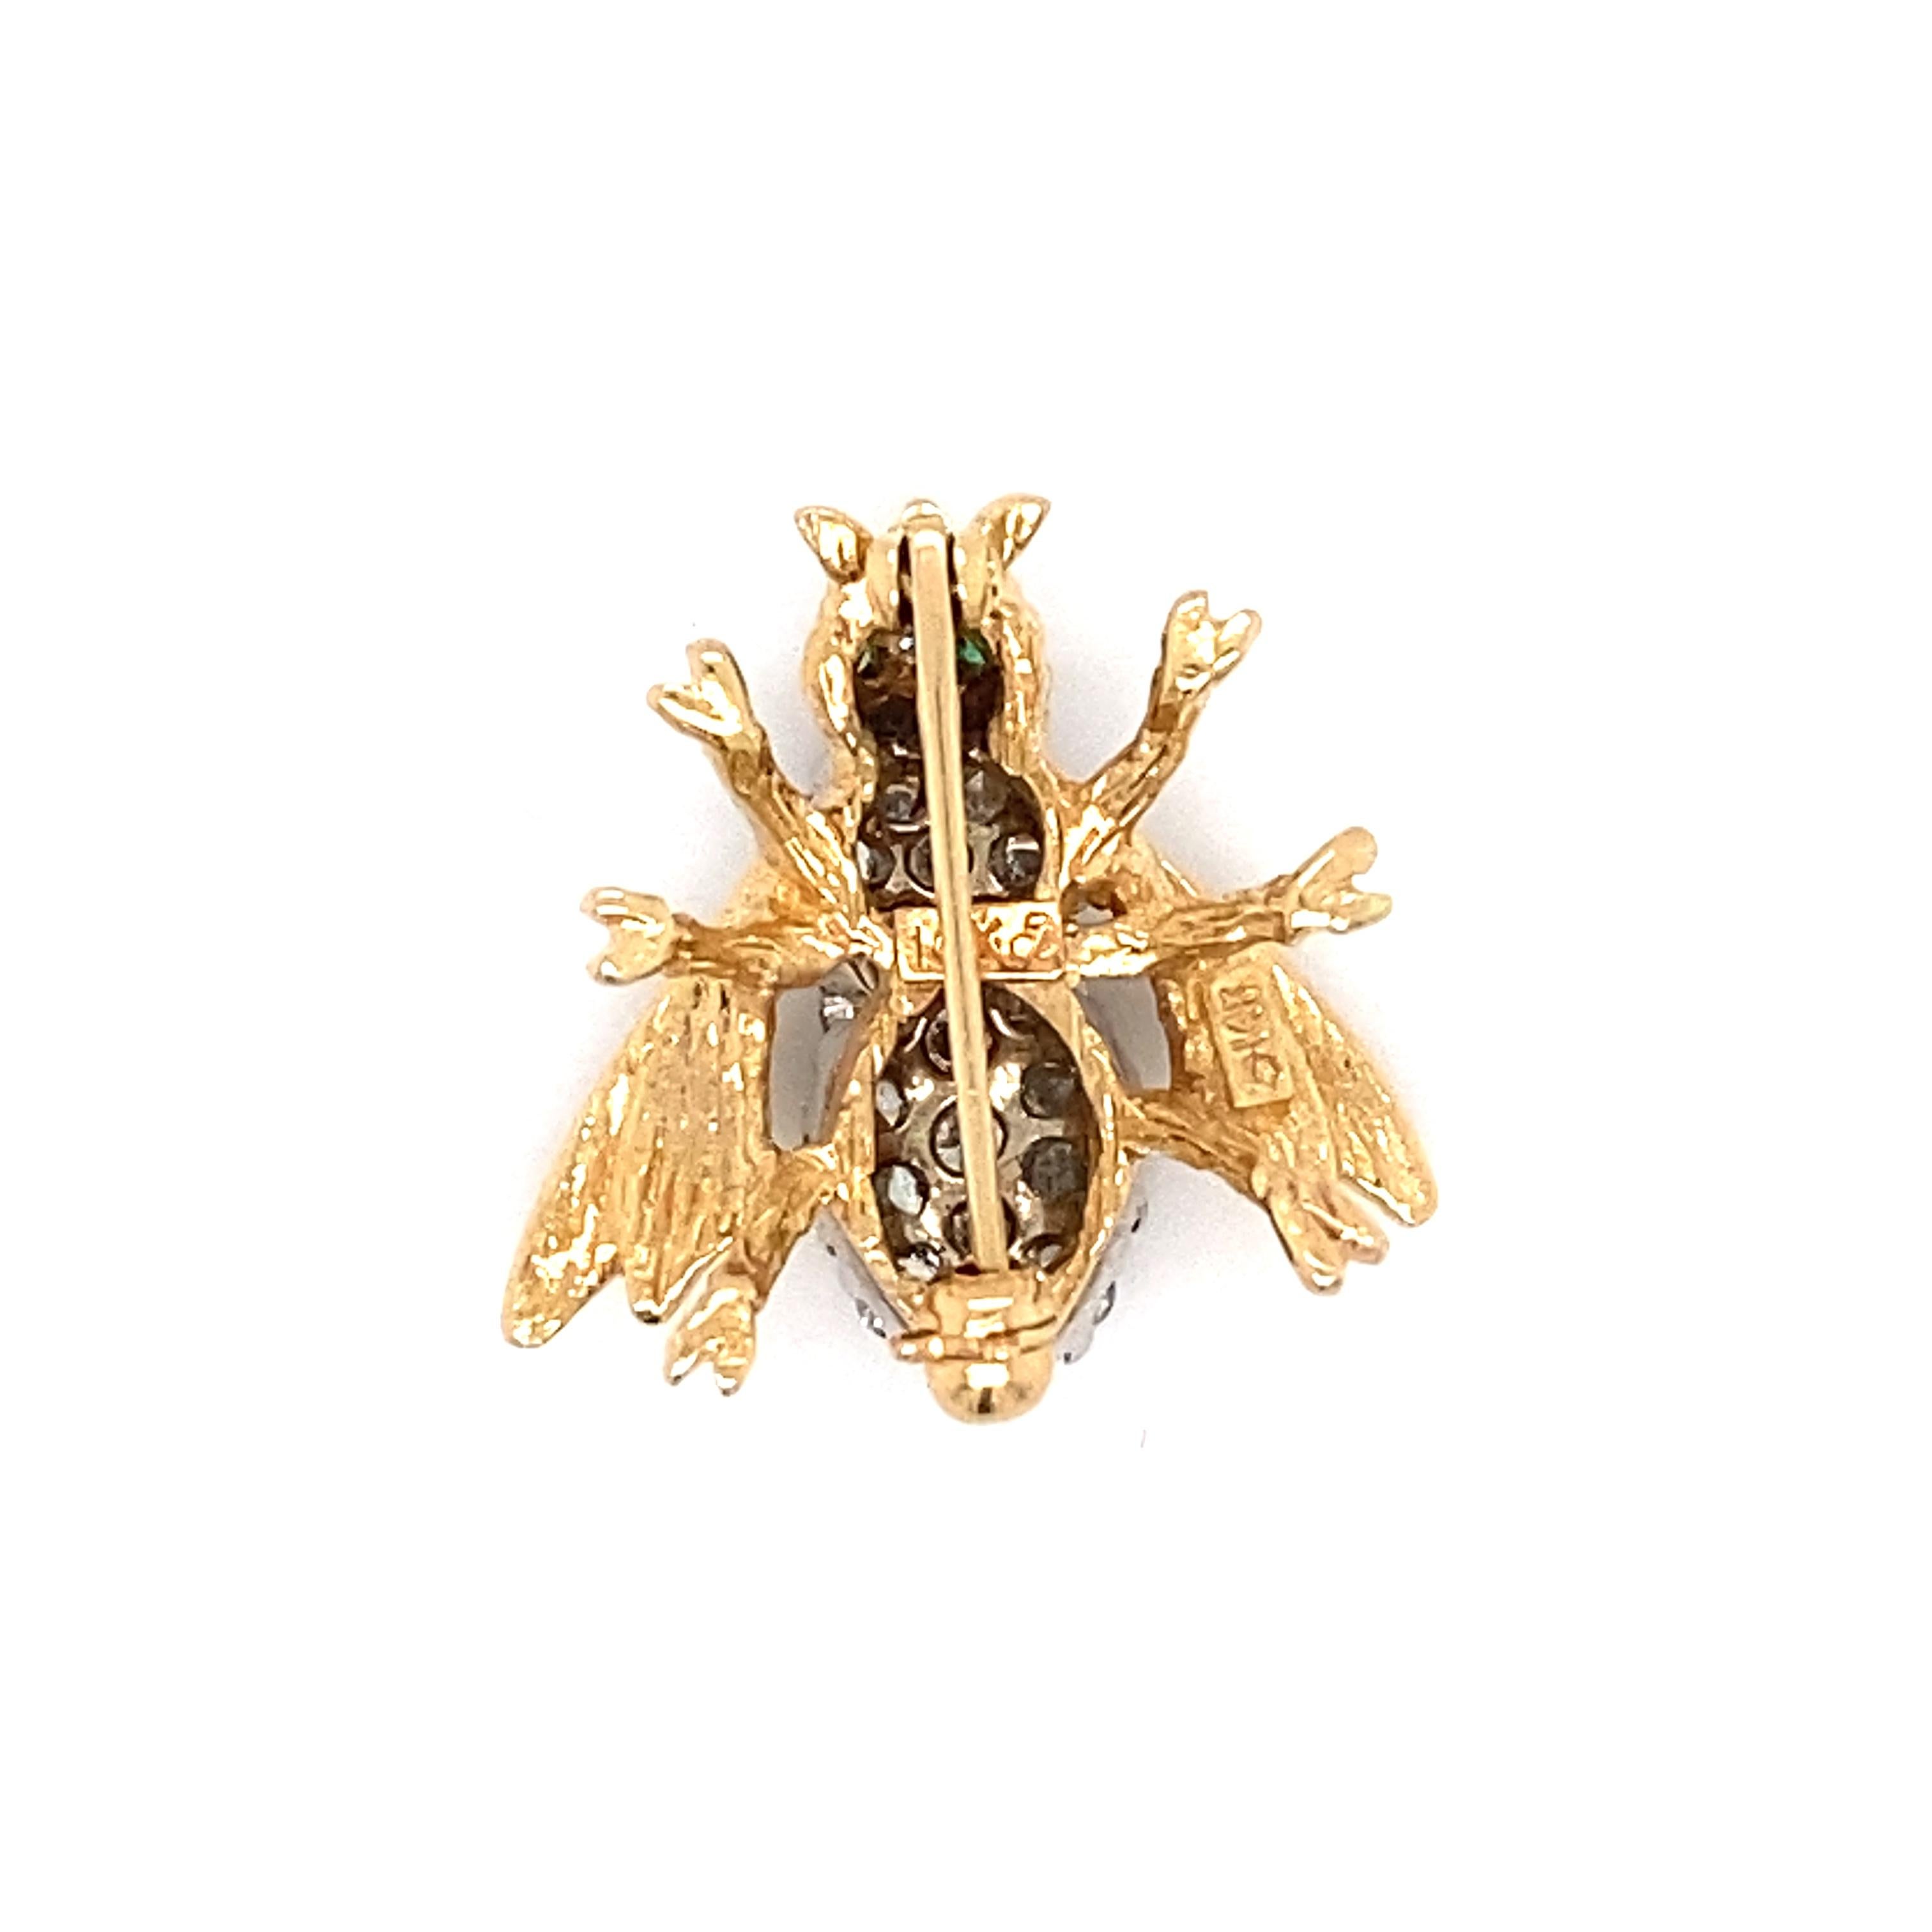 Item Details: This charming vintage bee pin has diamond accents and emerald eyes.

Circa: 1960s
Metal Type: 14 Karat Yellow Gold

Diamond Details:

Carat: 0.40 carat total weight
Shape: Round brilliant
Color: G-H
Clarity: VS